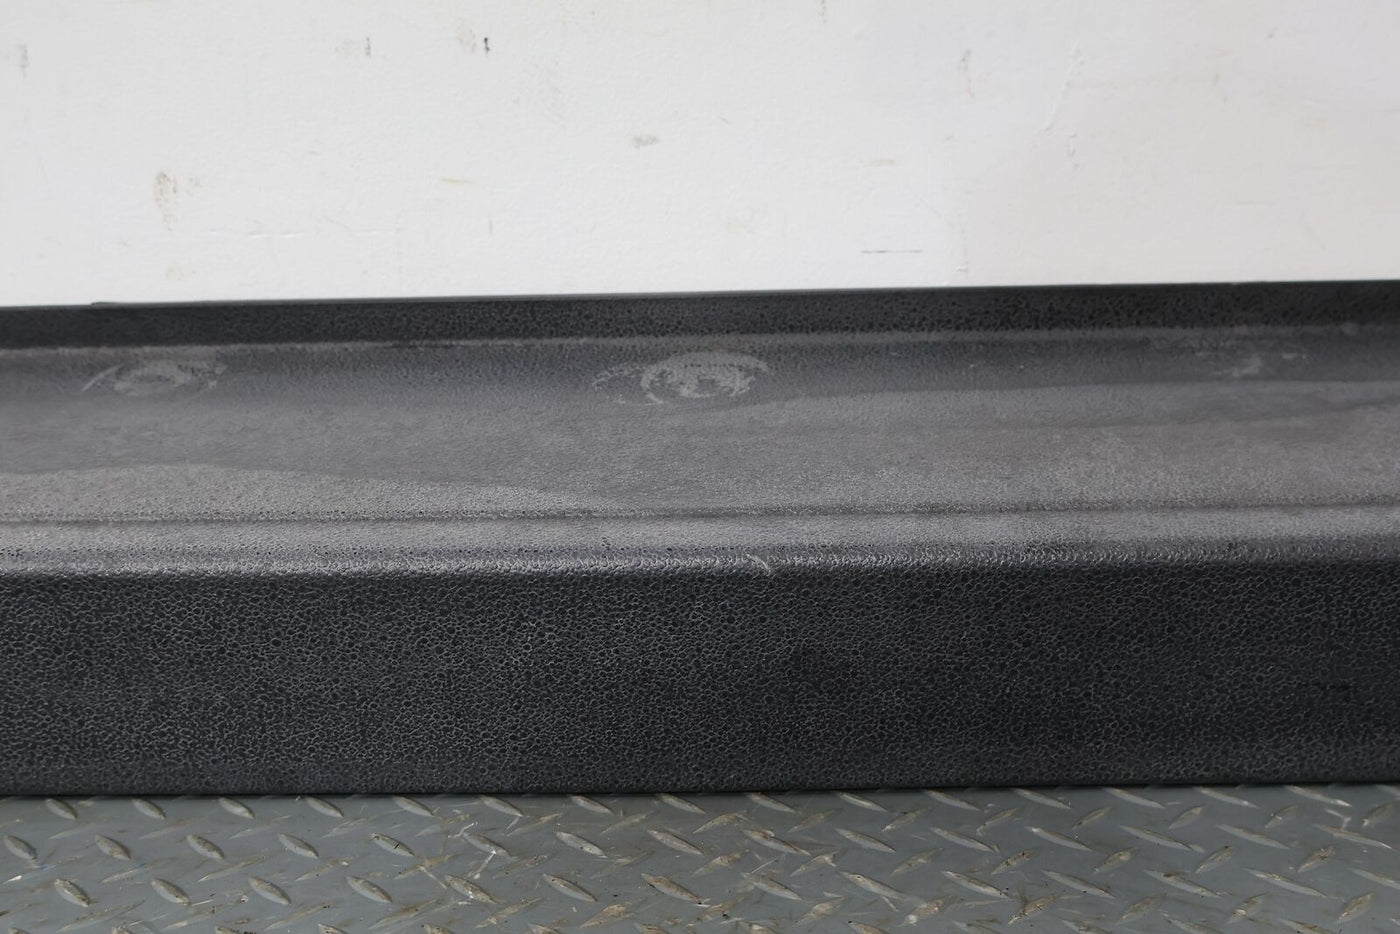 05-09 Hummer H2 SUT REAR Center Bumper Cover Section (Black Textured) SUT Truck